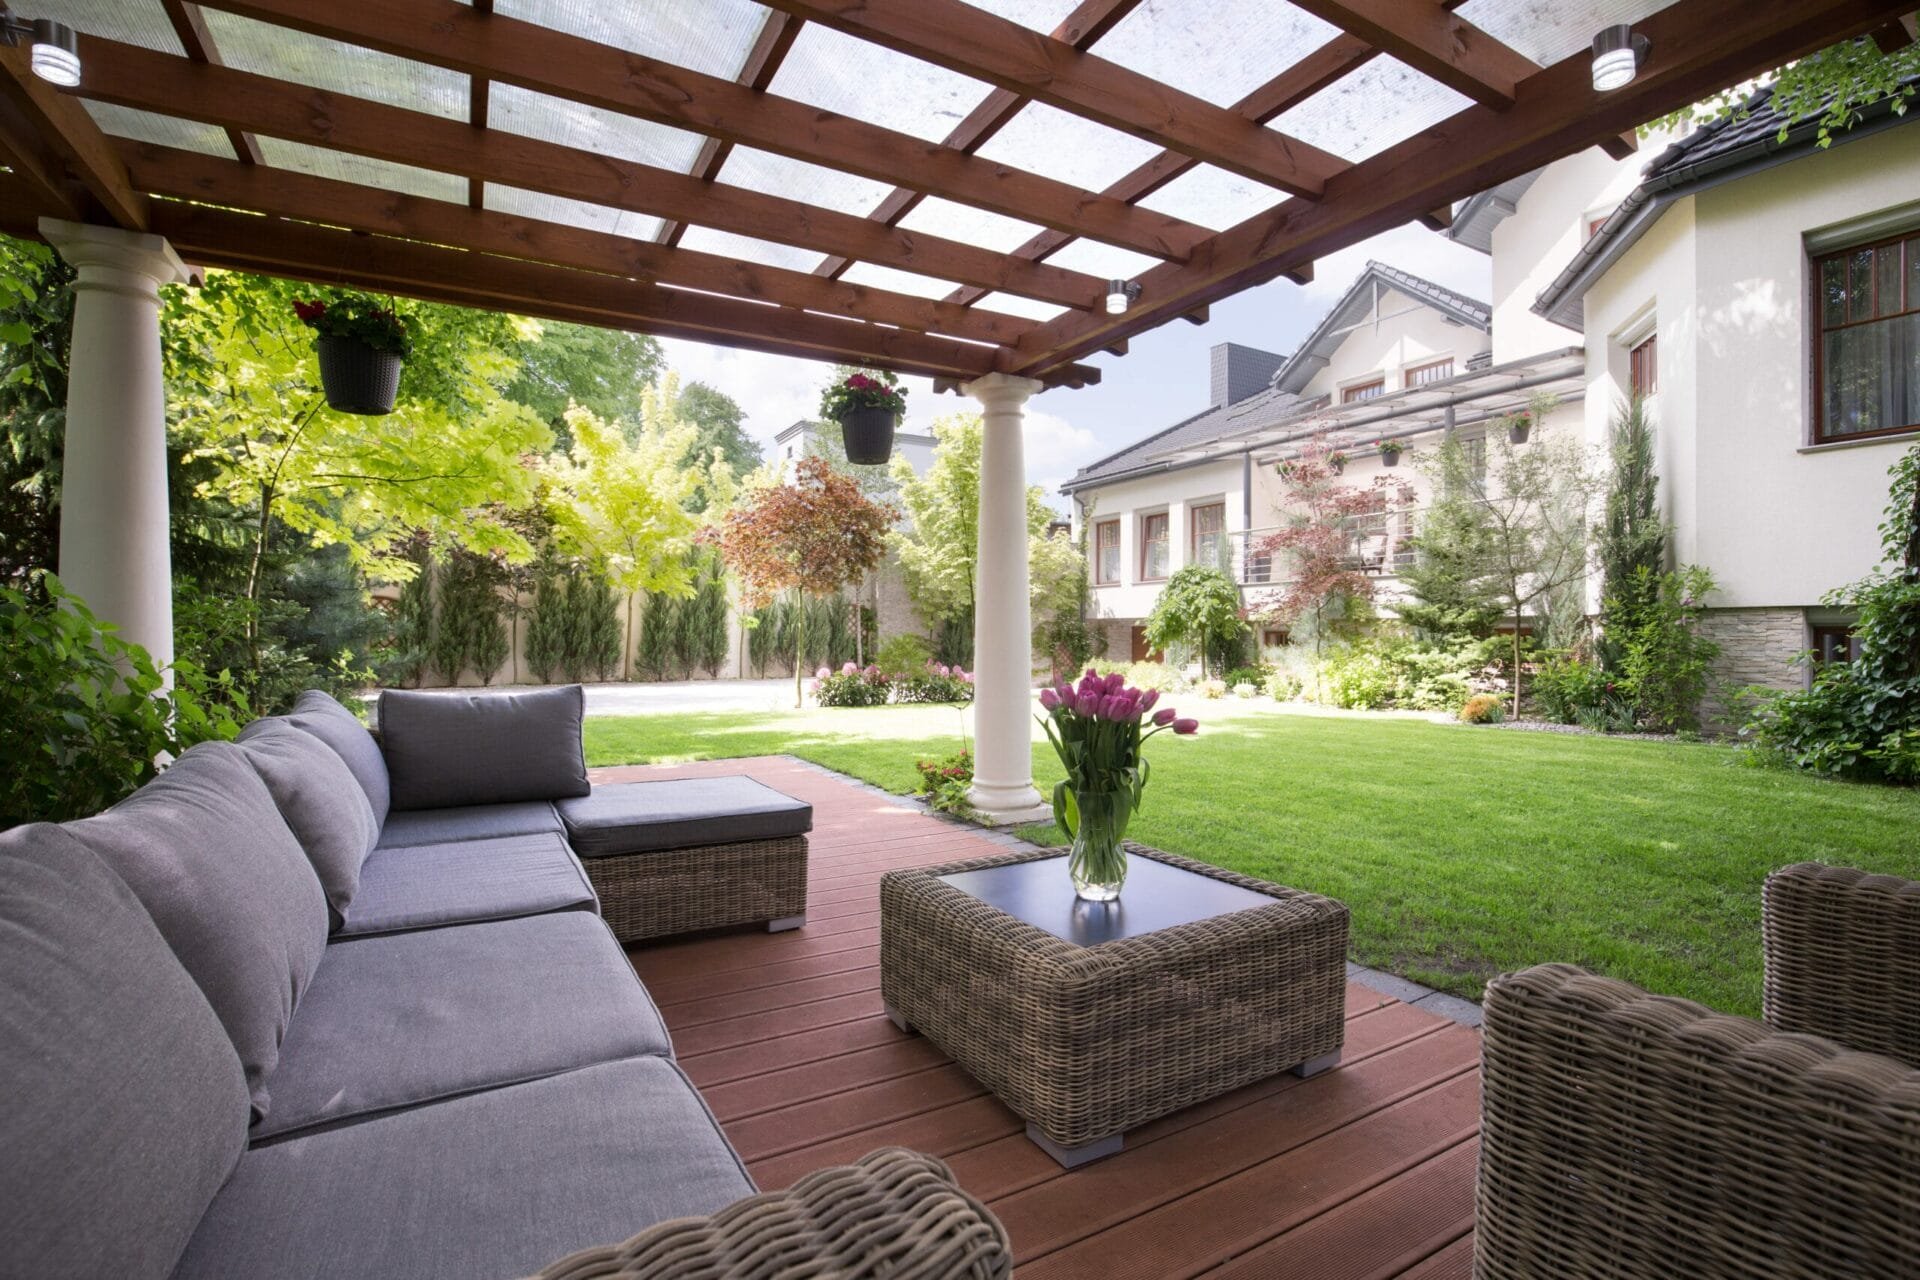 A well-designed patio with a pergola, featuring a cozy seating area, interlocking paving system, hanging plants, and a view of a lush garden and a stately home.